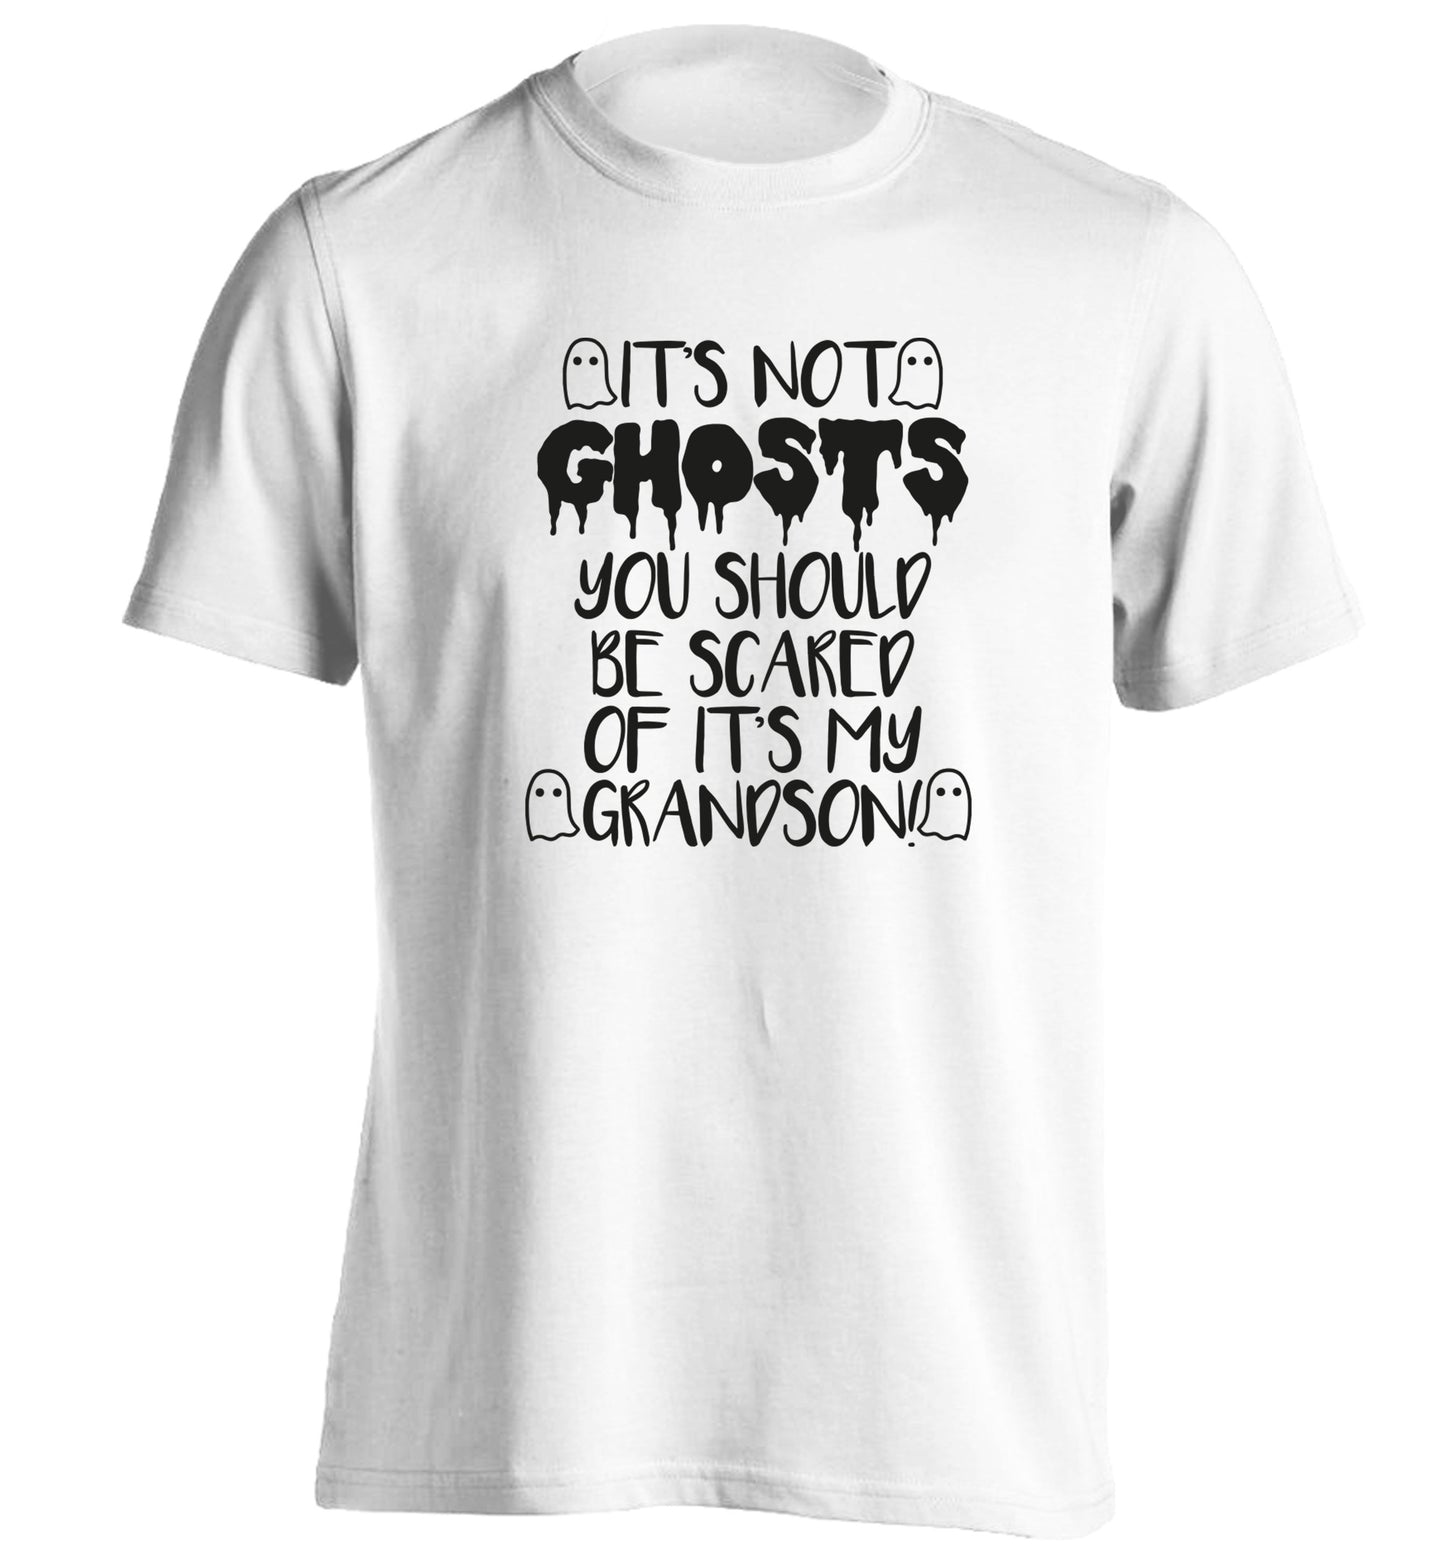 It's not ghosts you should be scared of it's my grandson! adults unisex white Tshirt 2XL